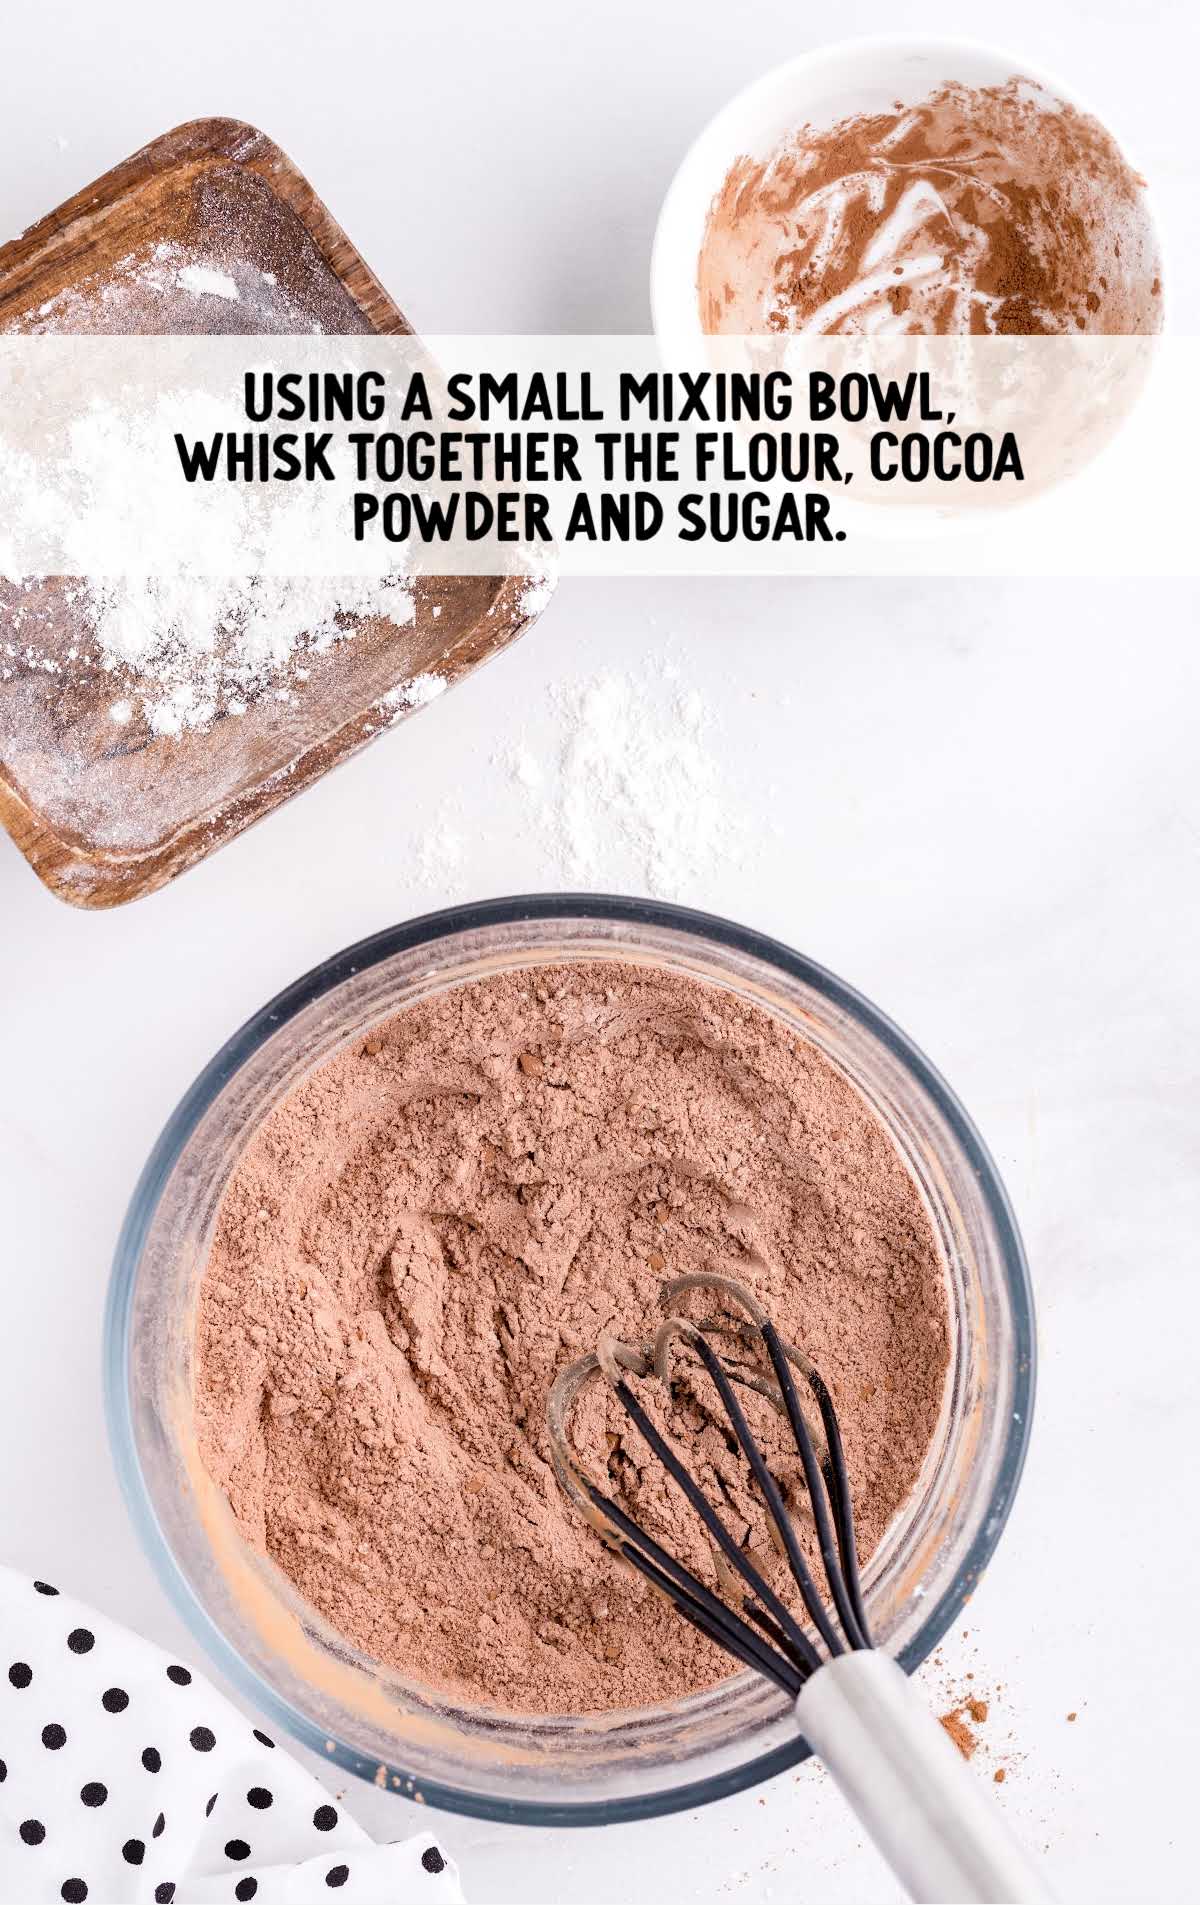 flour, cocoa powder, and sugar whisked together in a bowl